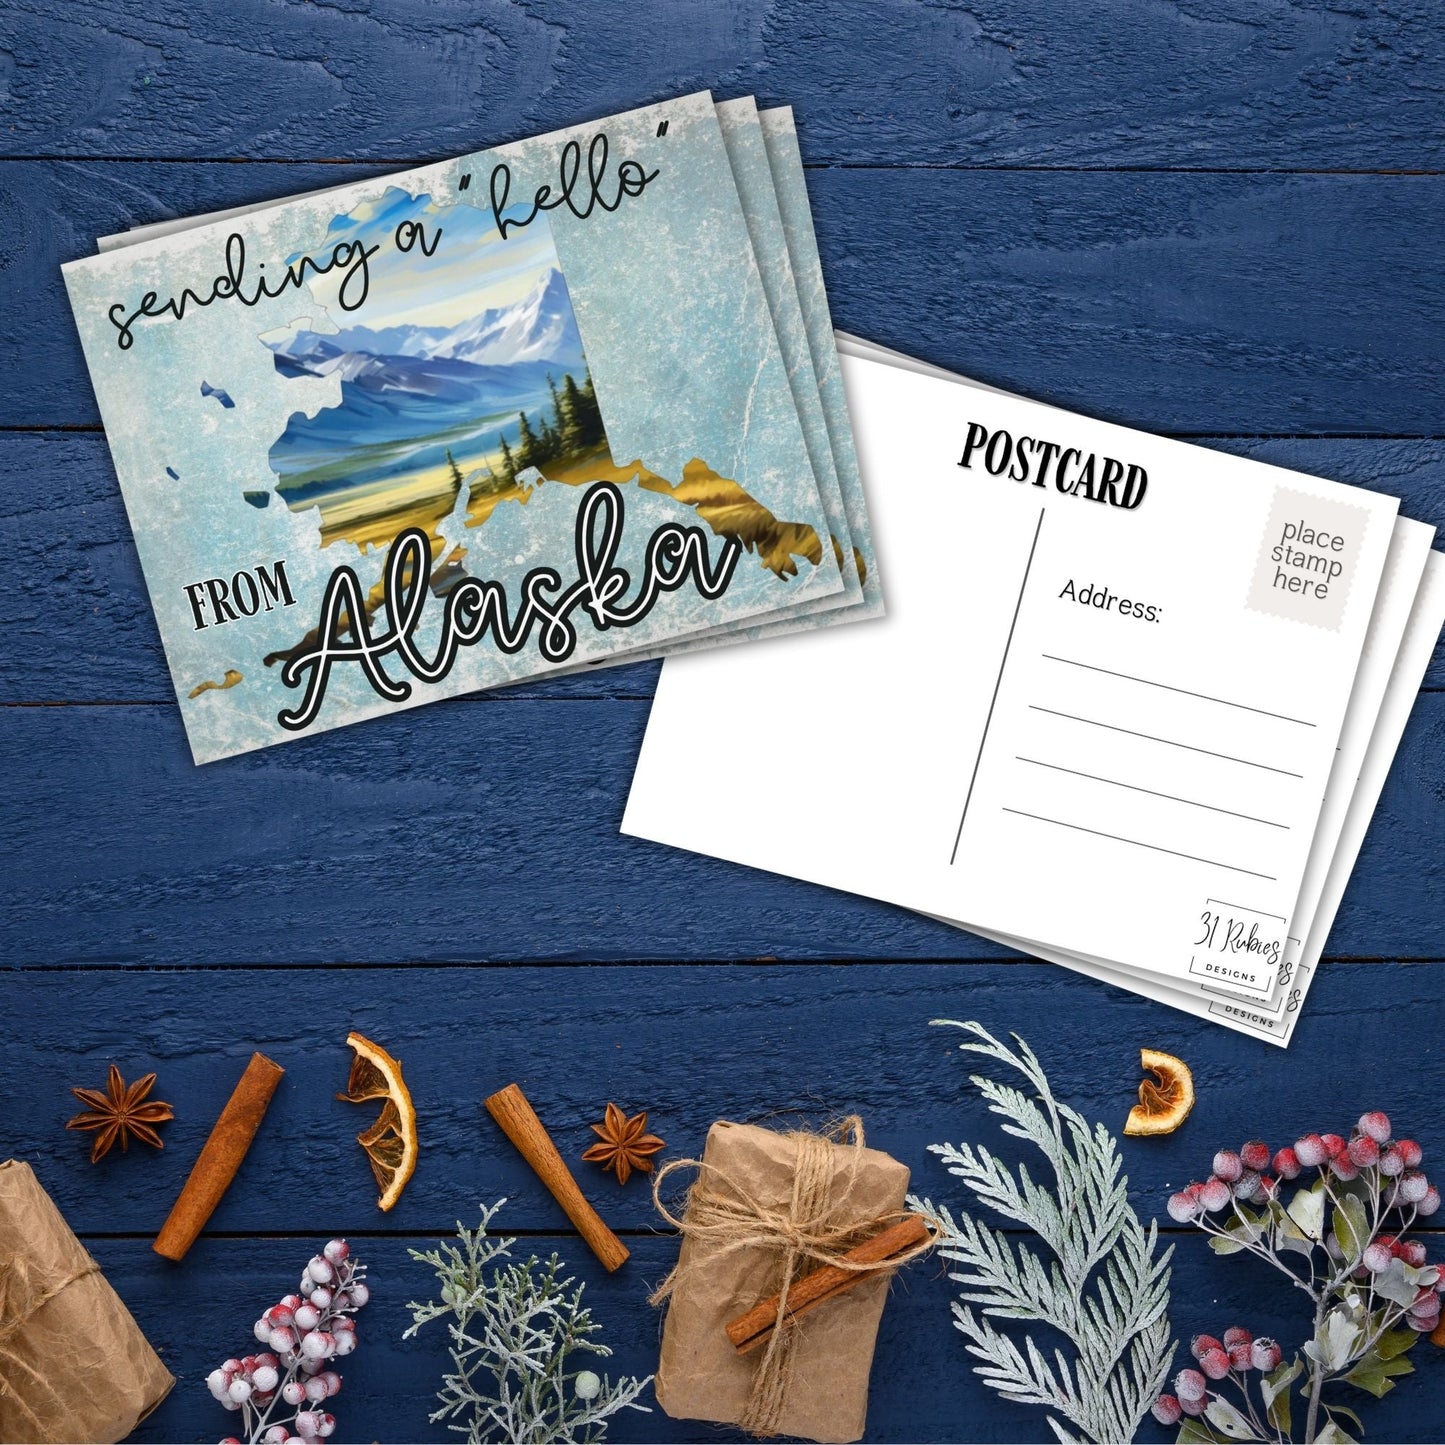 Sending a Hello From... US States! Postcards - 31 Rubies Designs